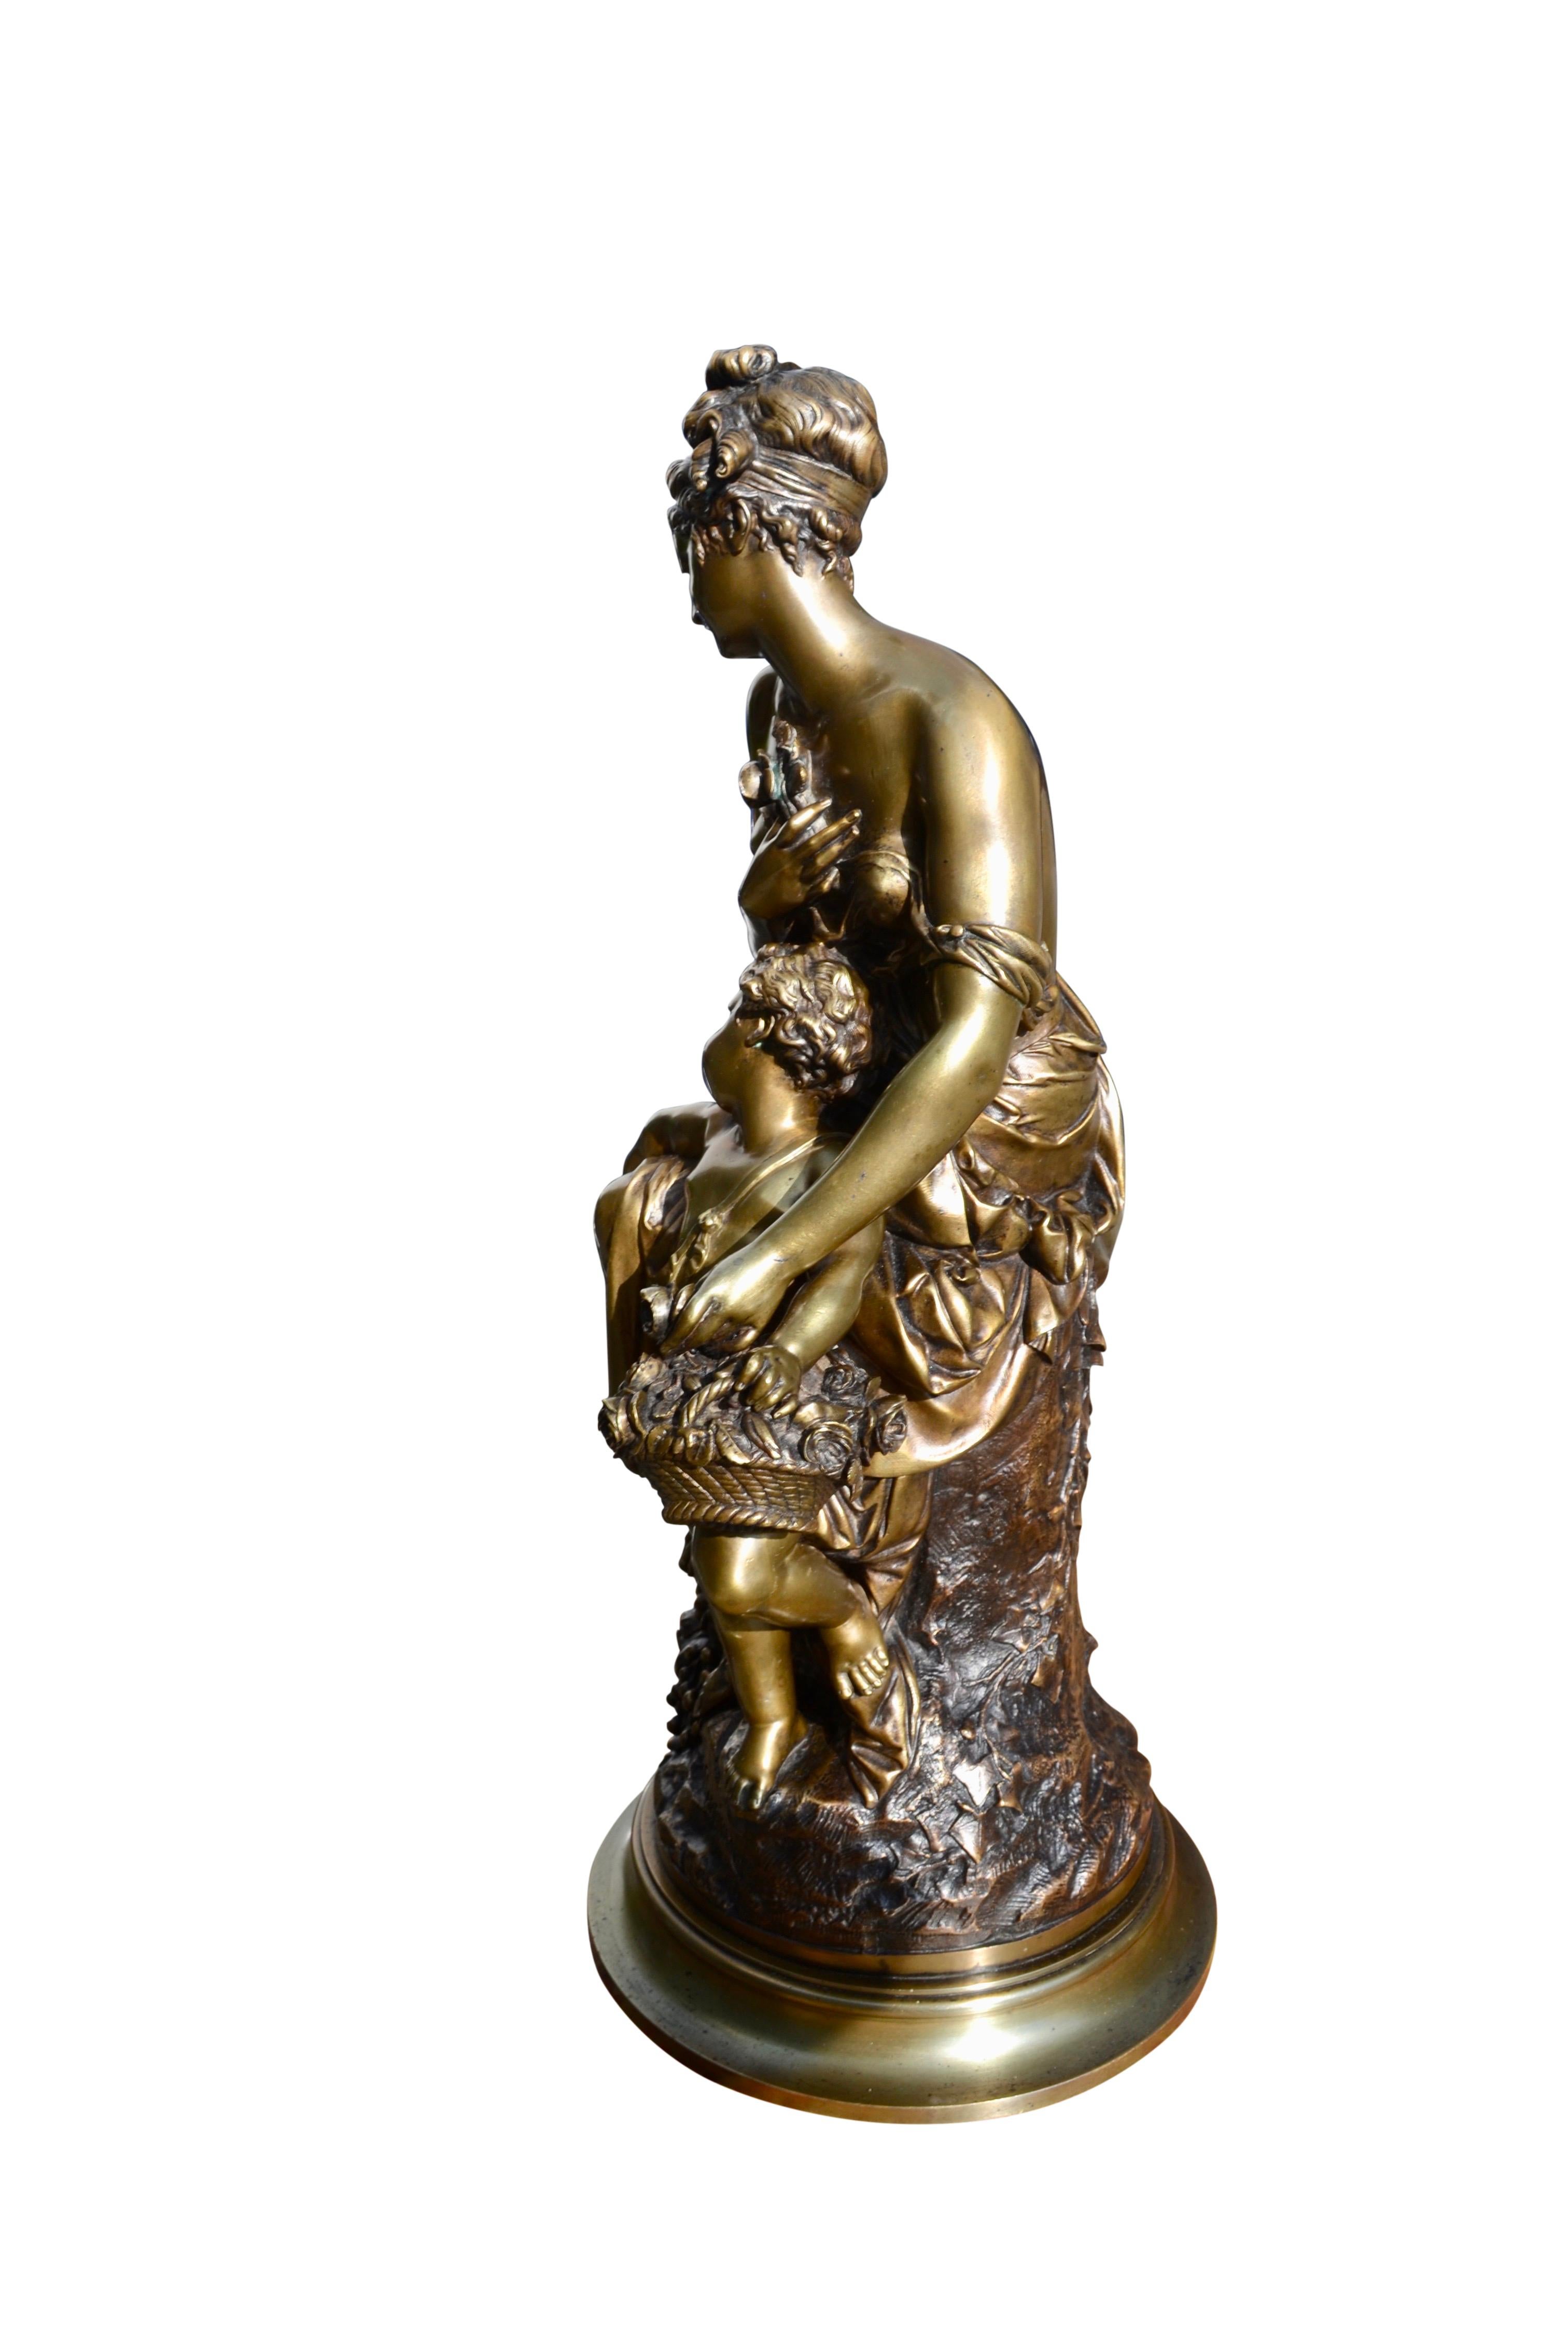 19th Century  A 19 Century French  Gilt bronze Statue of Venus and Cupid  signed A. Carrier 